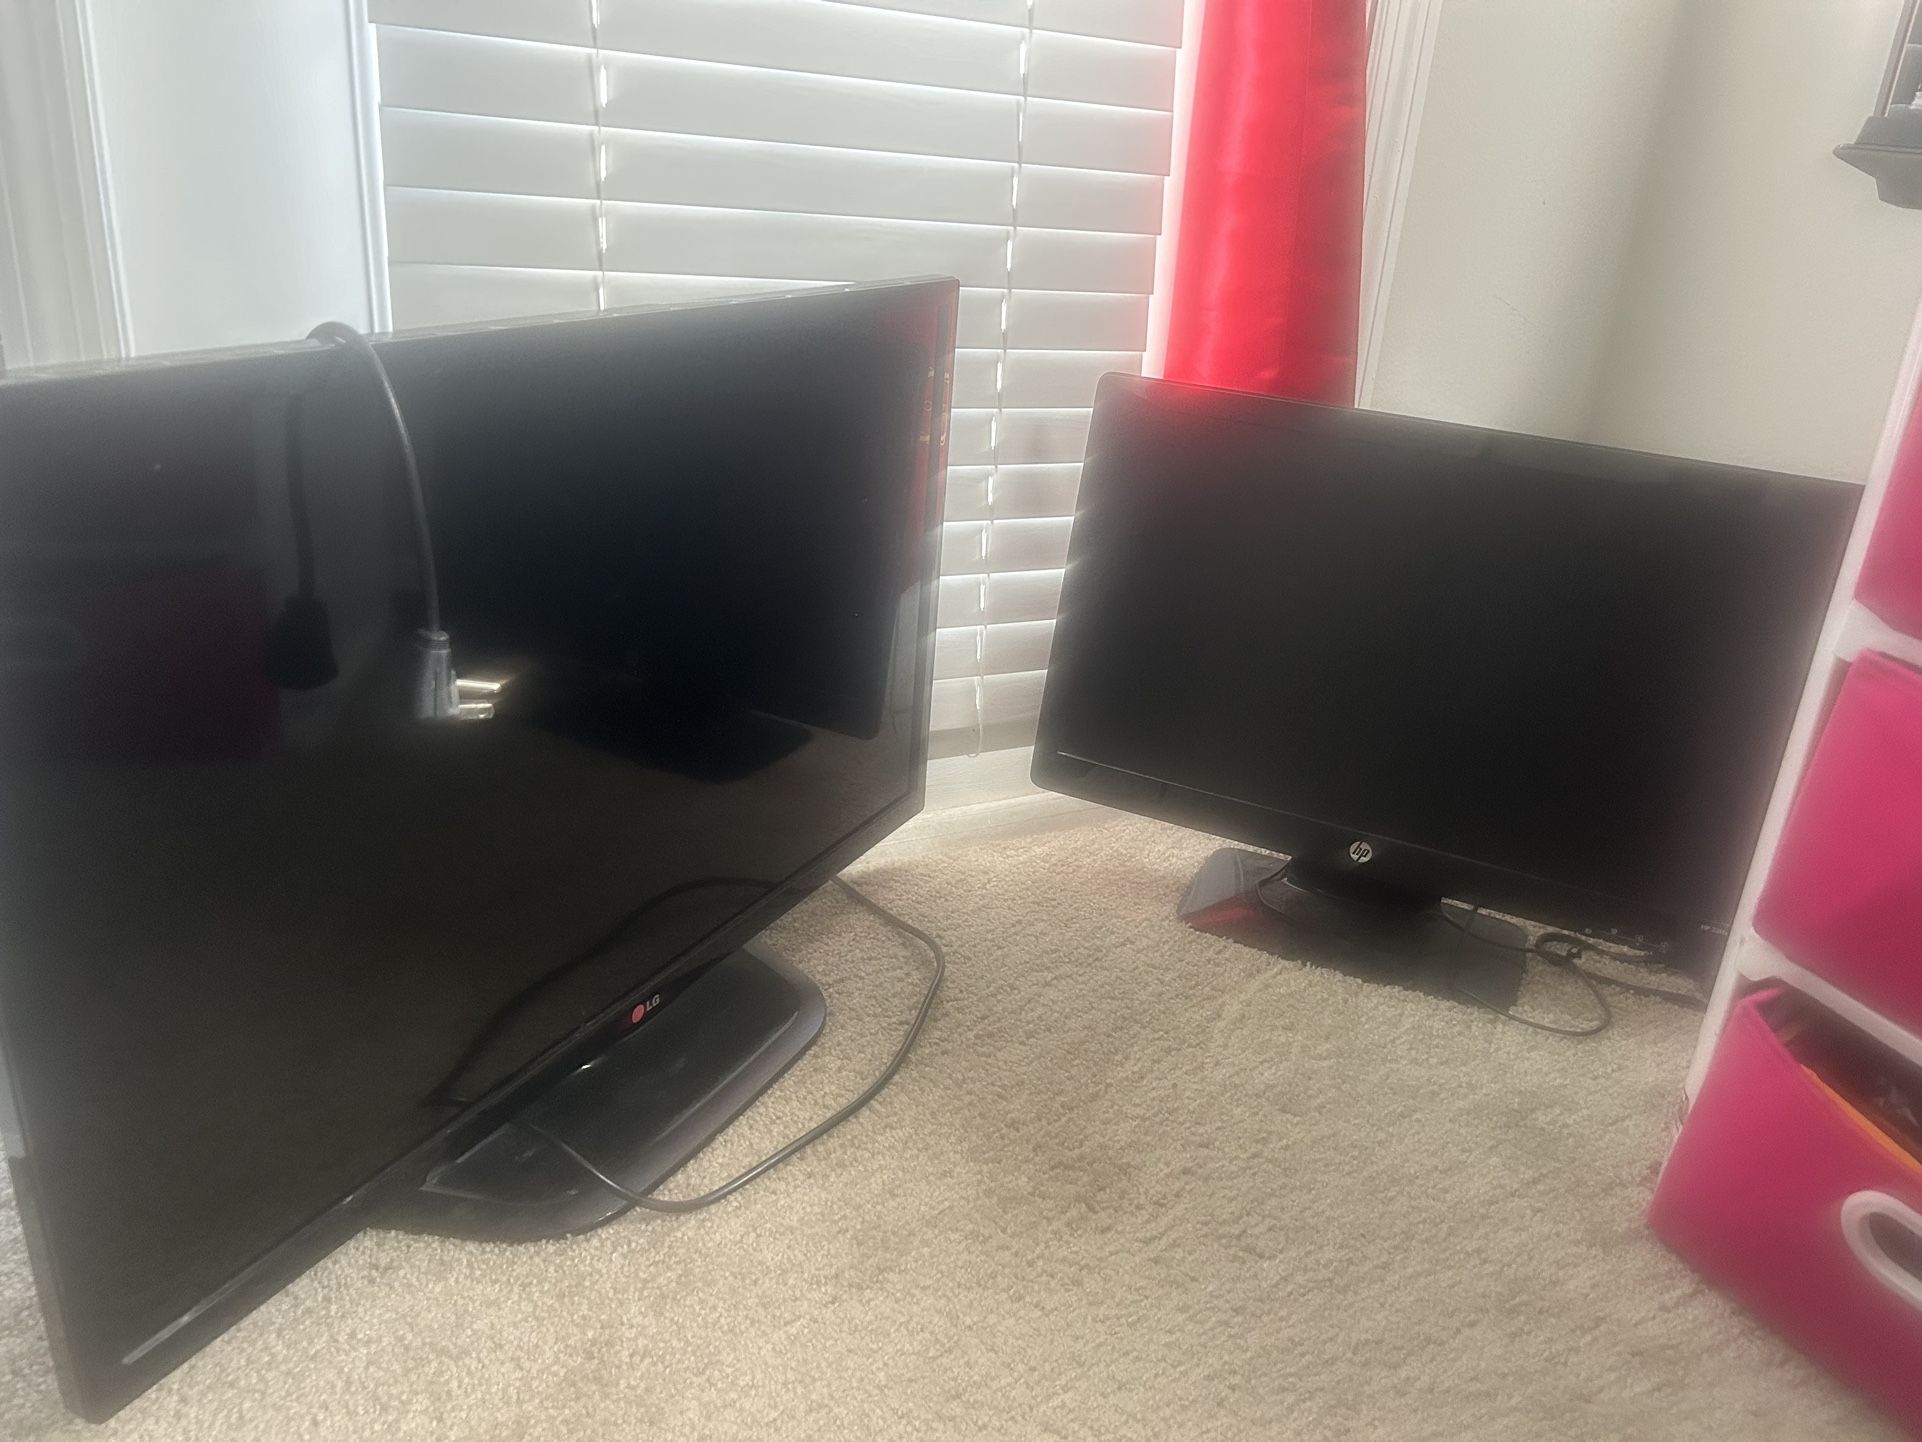 TV And Two Computer Monitors 